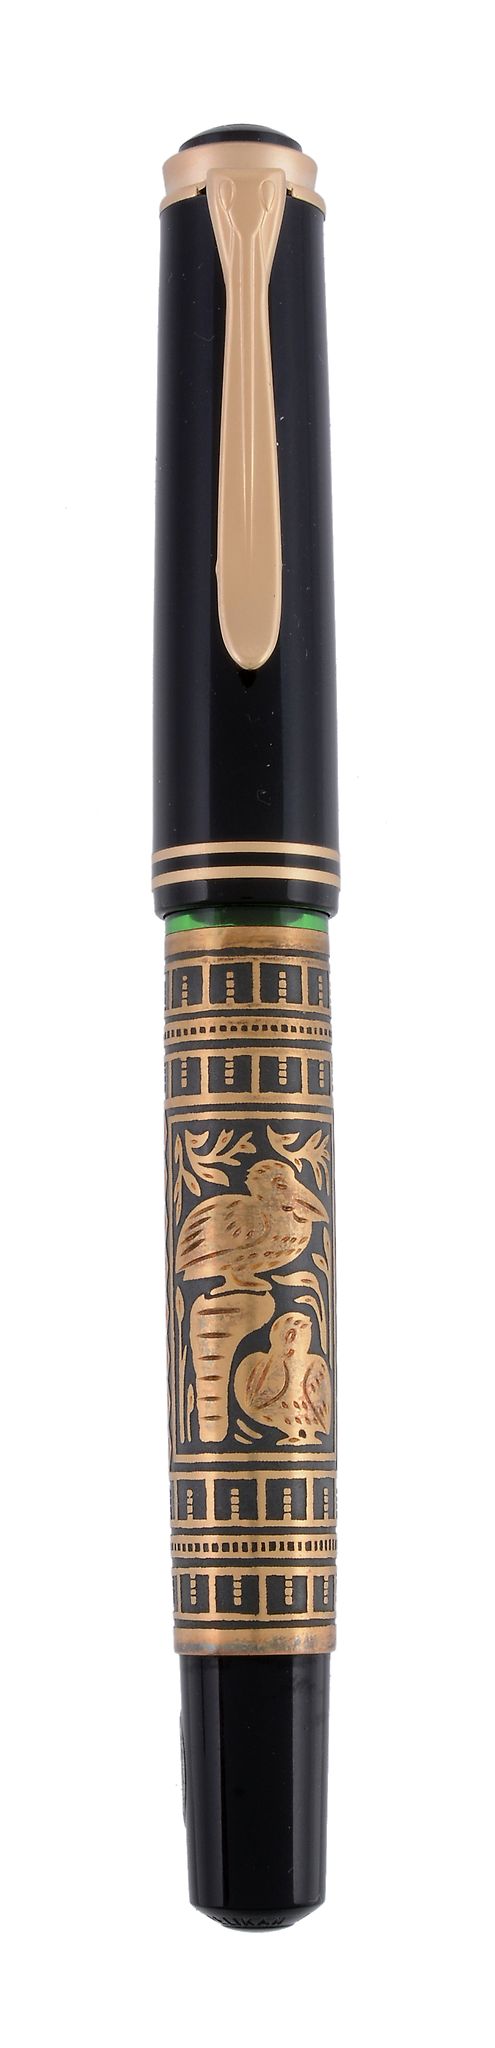 Pelikan, Toledo, a limited edition fountain pen,   no.10/6 35, the black resin cap with a gold